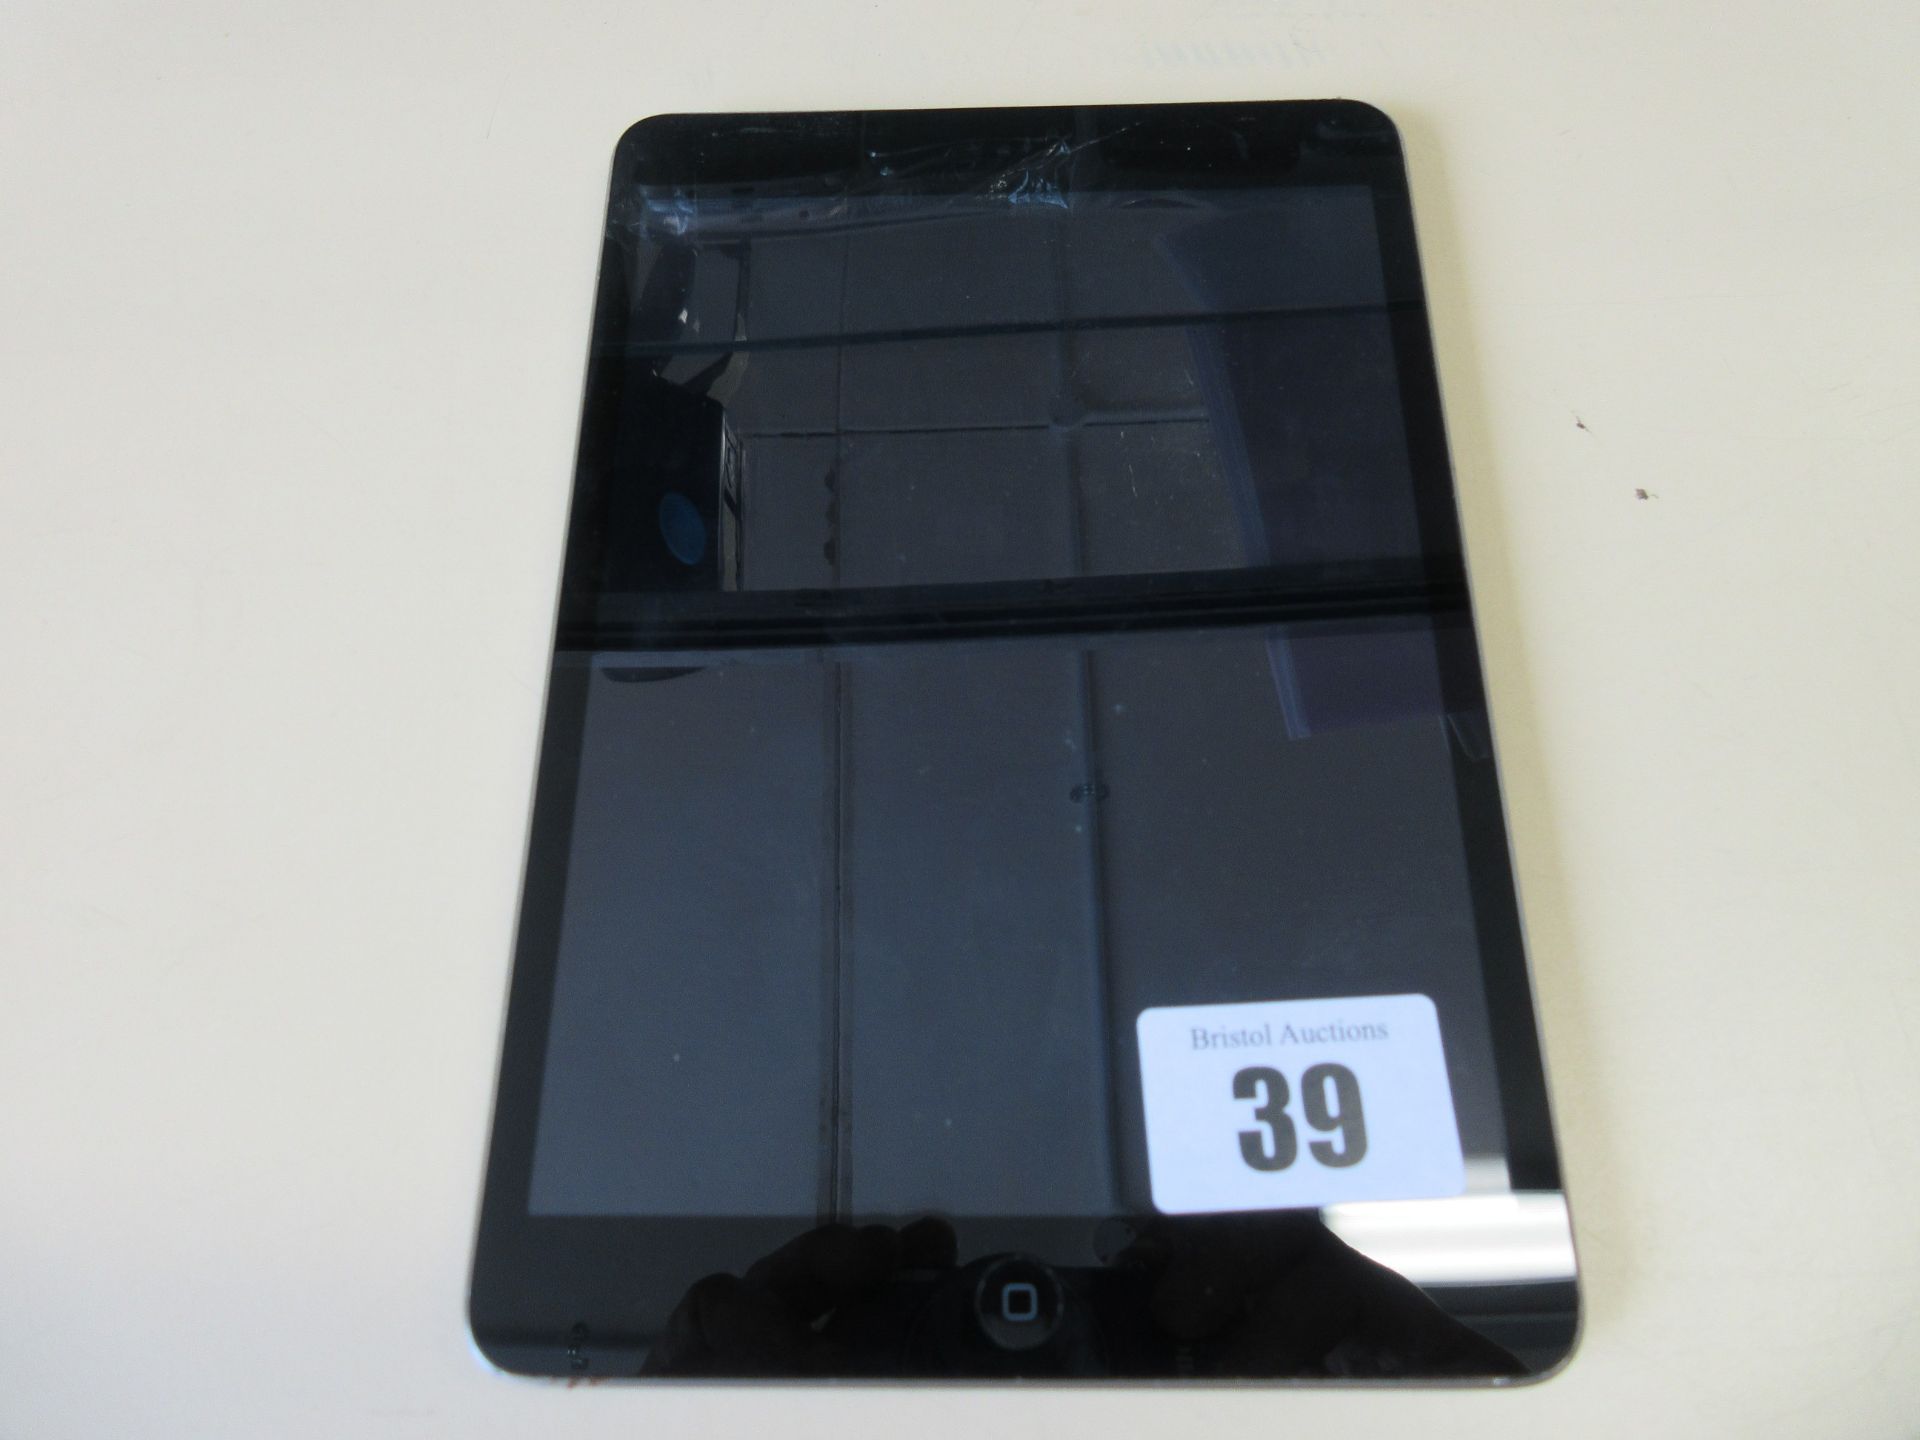 A pre-owned Apple iPad mini 2 (Retina/2nd Gen, Wi-Fi Only) A1489 128GB in Space Grey (Serial: